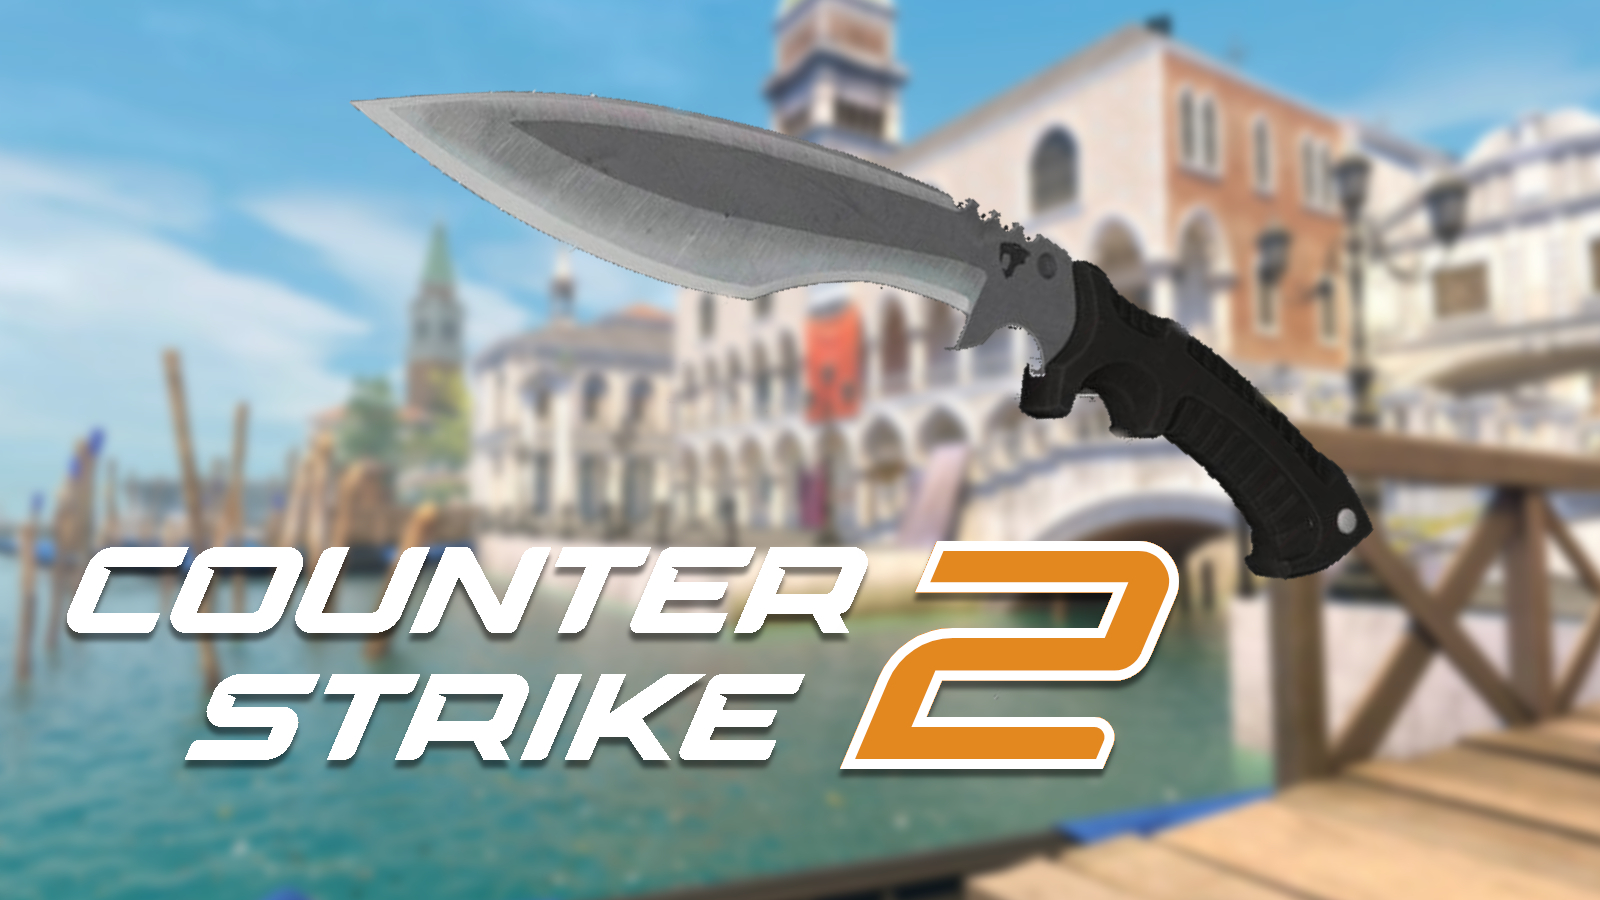 Counter-Strike 2 breaks various CSGO skins, stickers and knives in limited  test beta - Dexerto